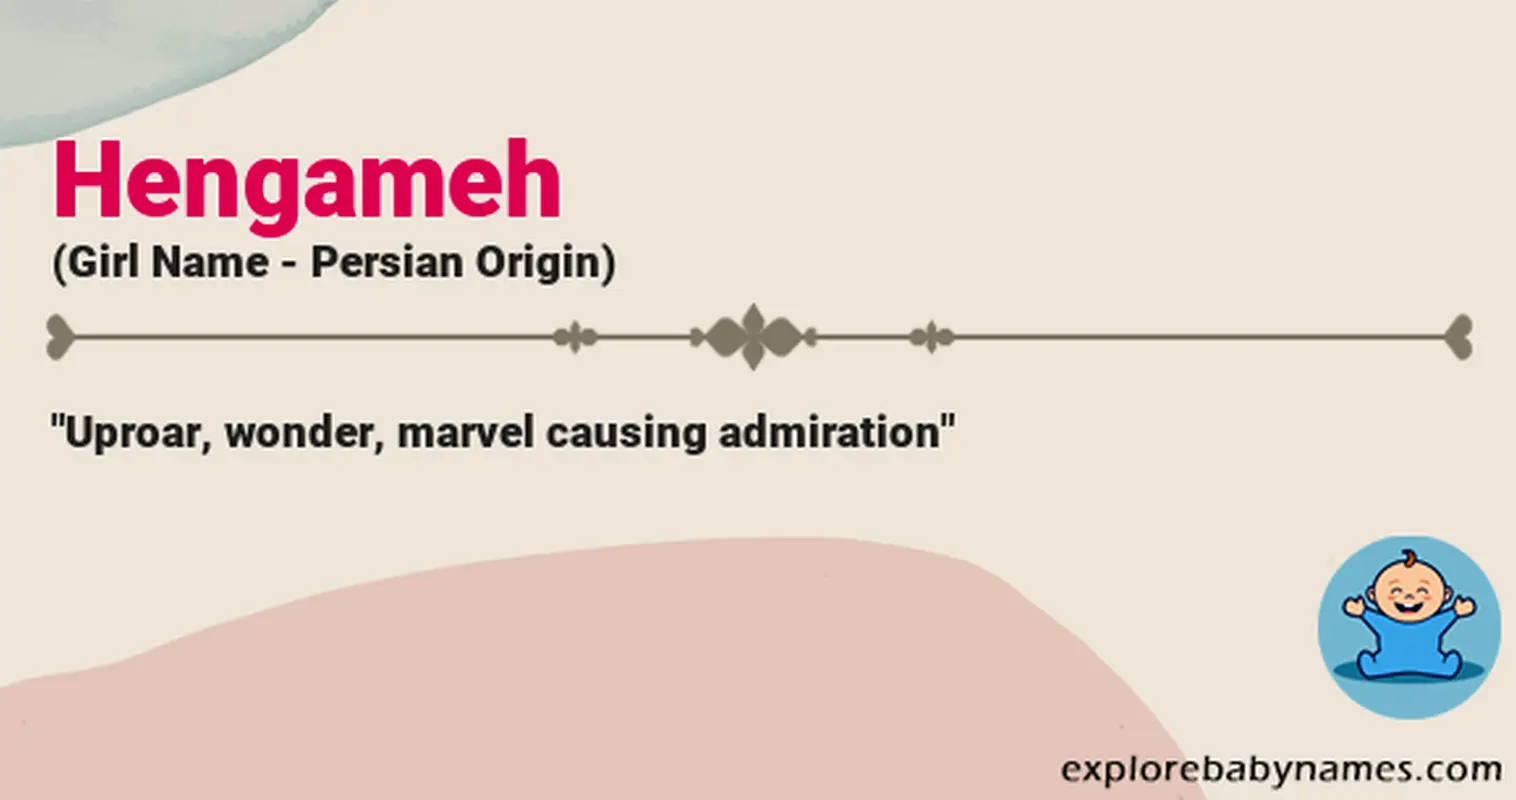 Meaning of Hengameh